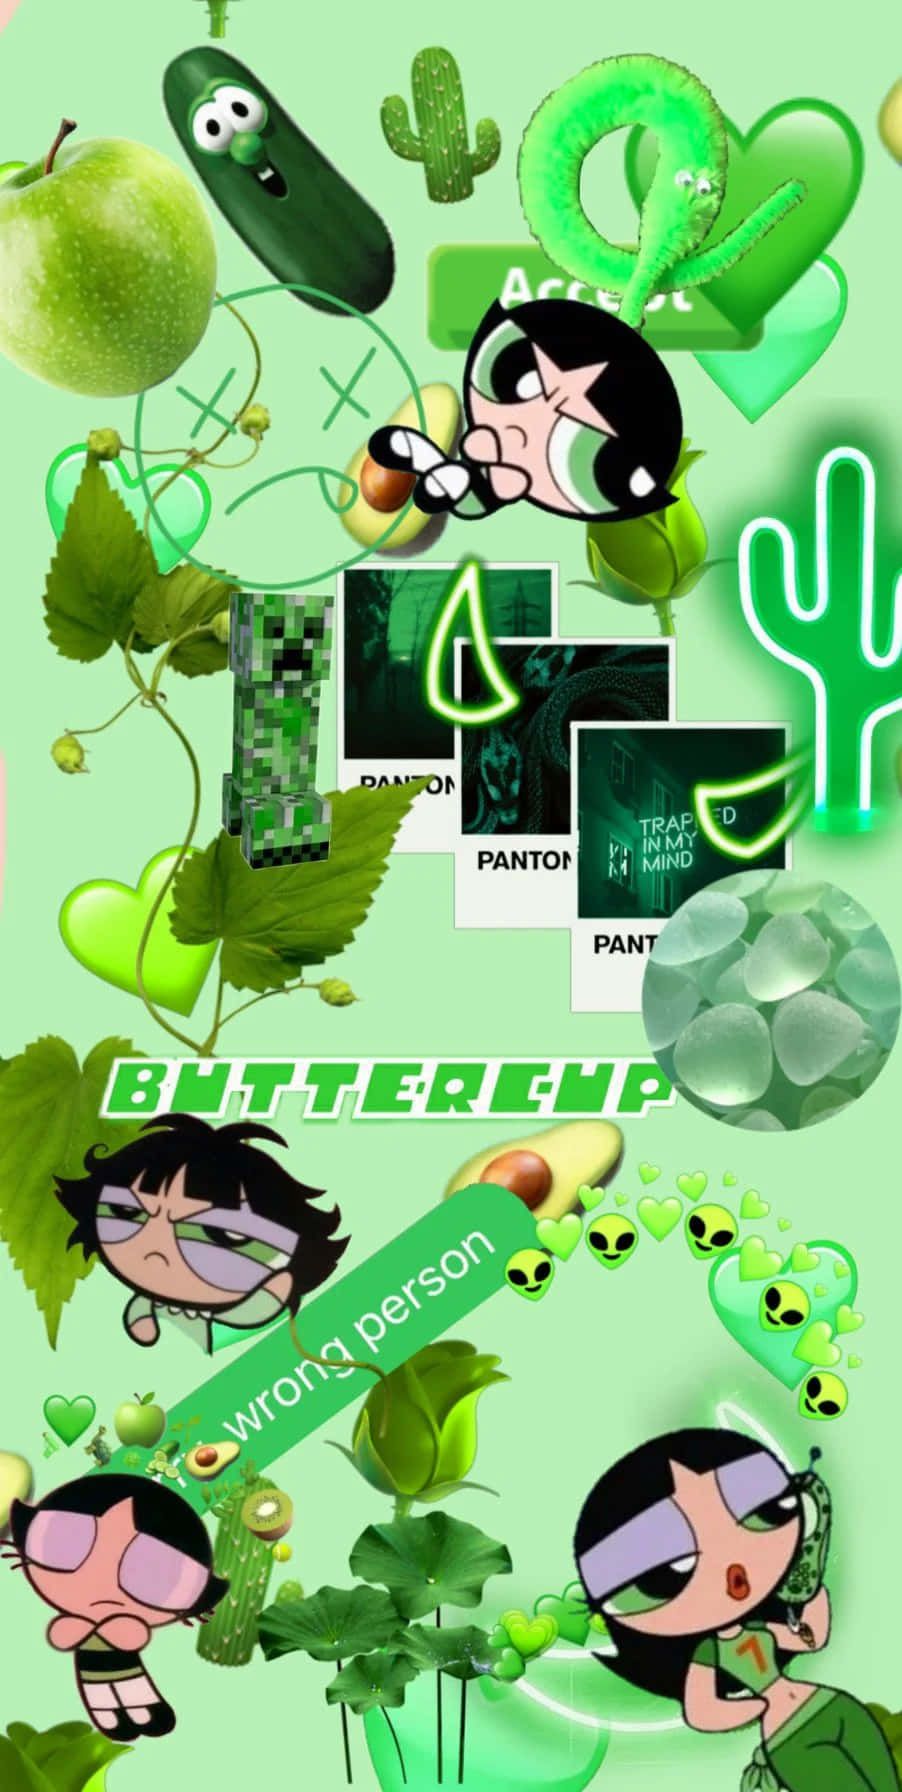 A green background with cartoon characters and plants - Buttercup